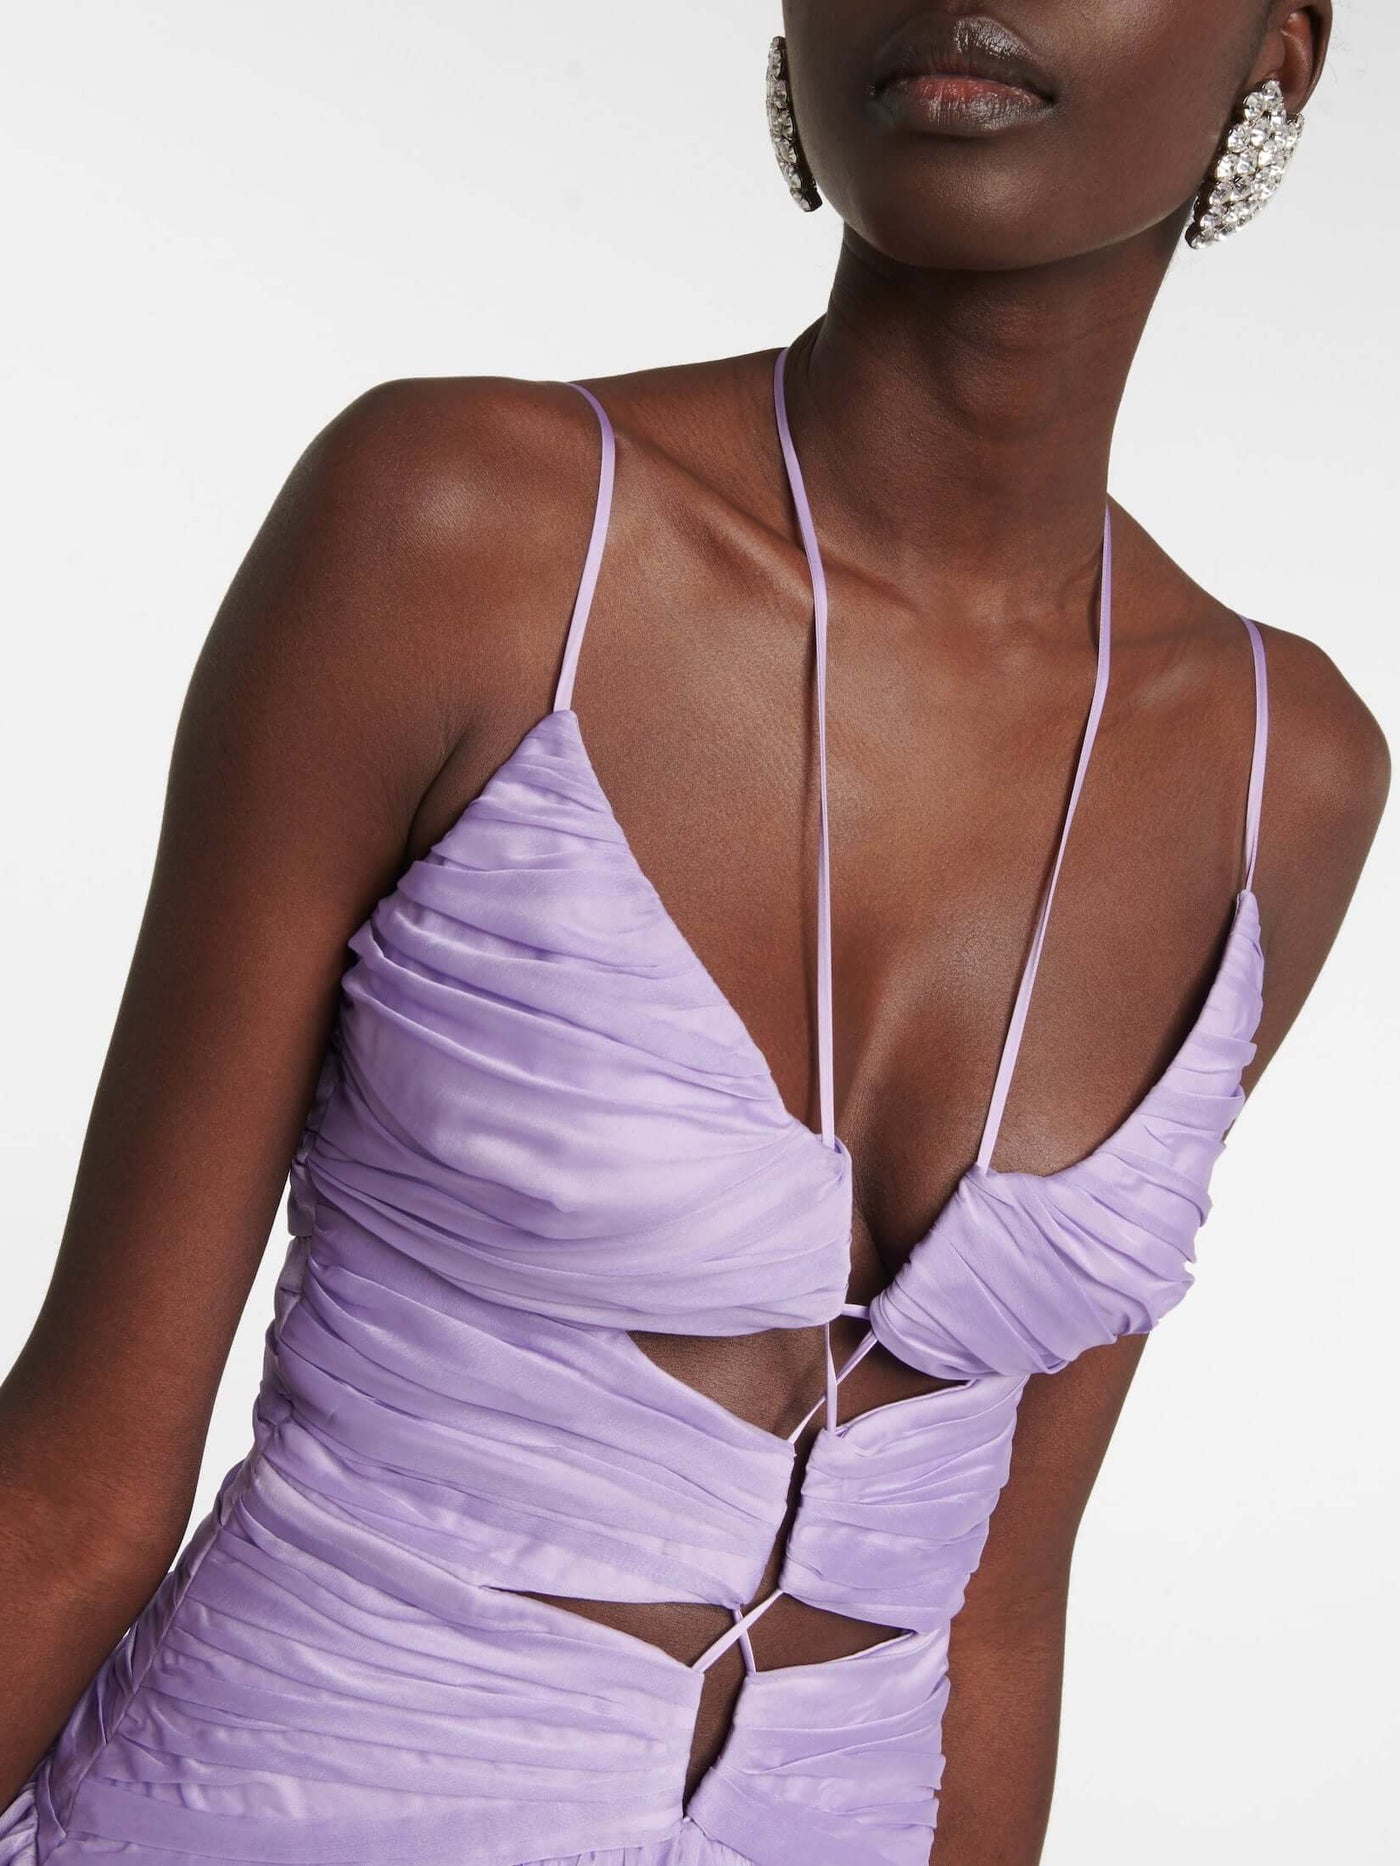 Elegant gown dress in purple chiffon with delicate spaghetti straps for a graceful look.